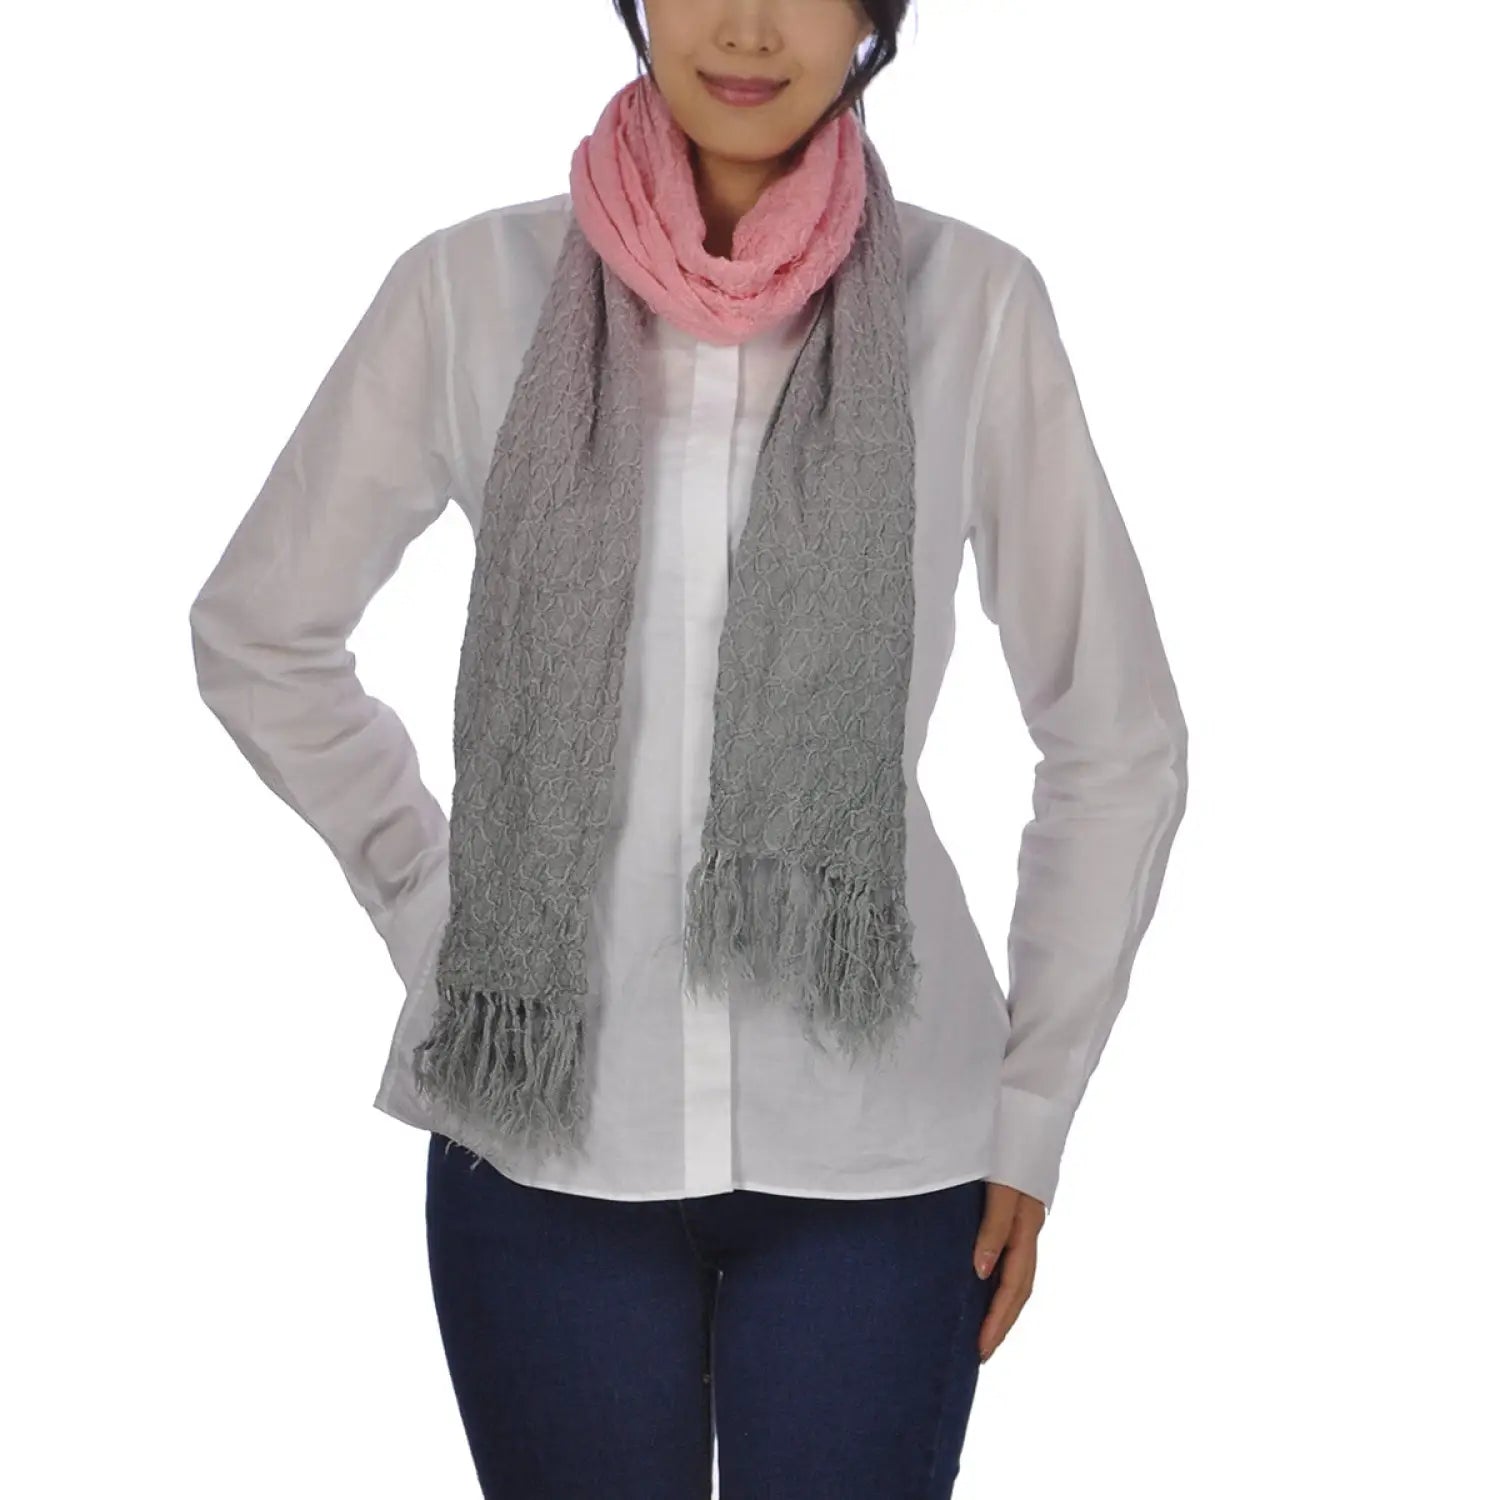 Sophisticated embroidered dip dye scarf with hat - woman wearing a scarf and hat